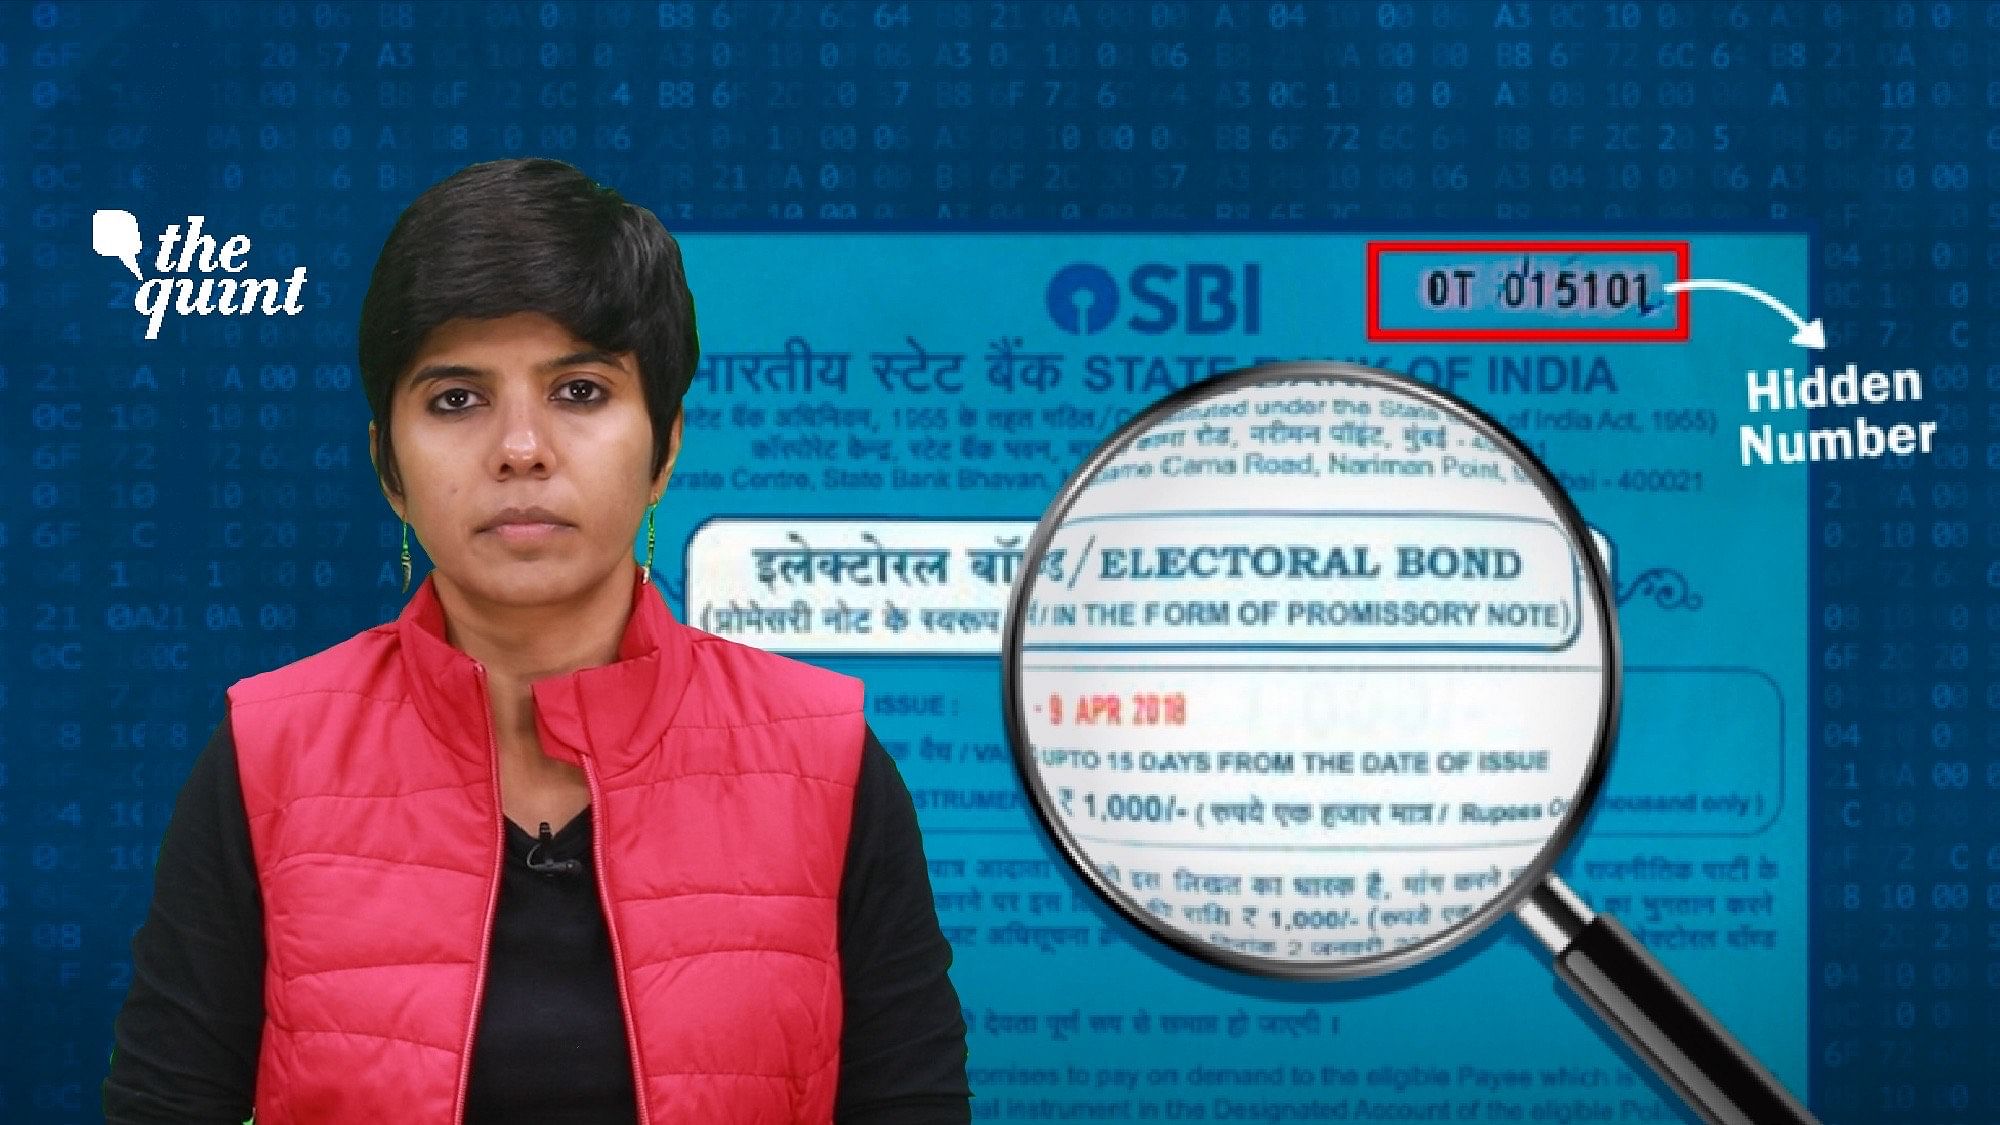 All you need to know about the electoral bonds expose